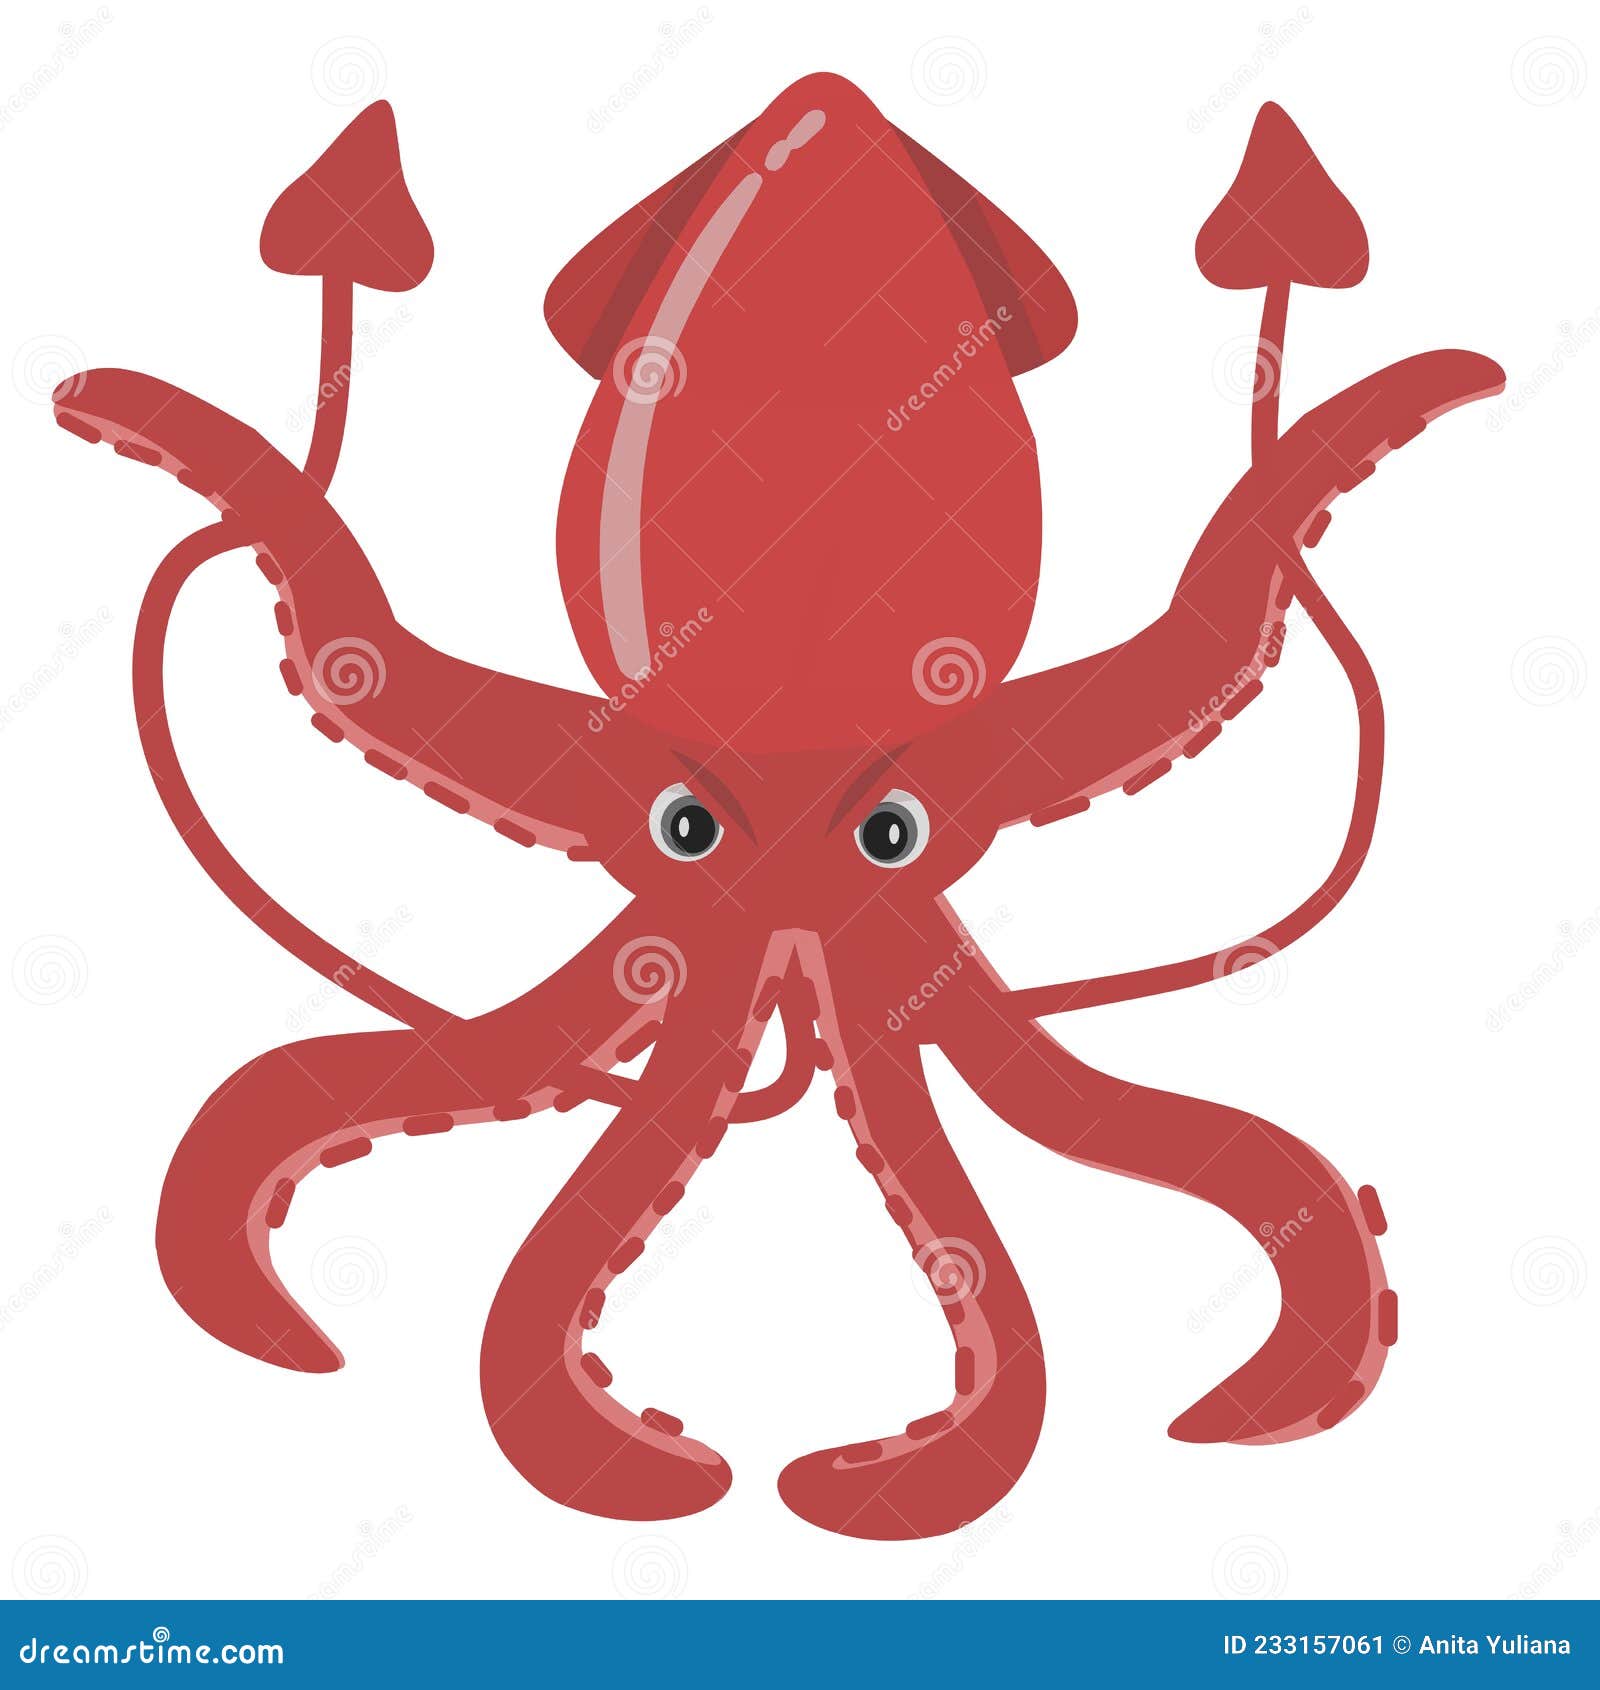 https://thumbs.dreamstime.com/z/angry-red-squid-cartoon-illustration-isolated-cute-drawing-sea-creature-smiling-233157061.jpg